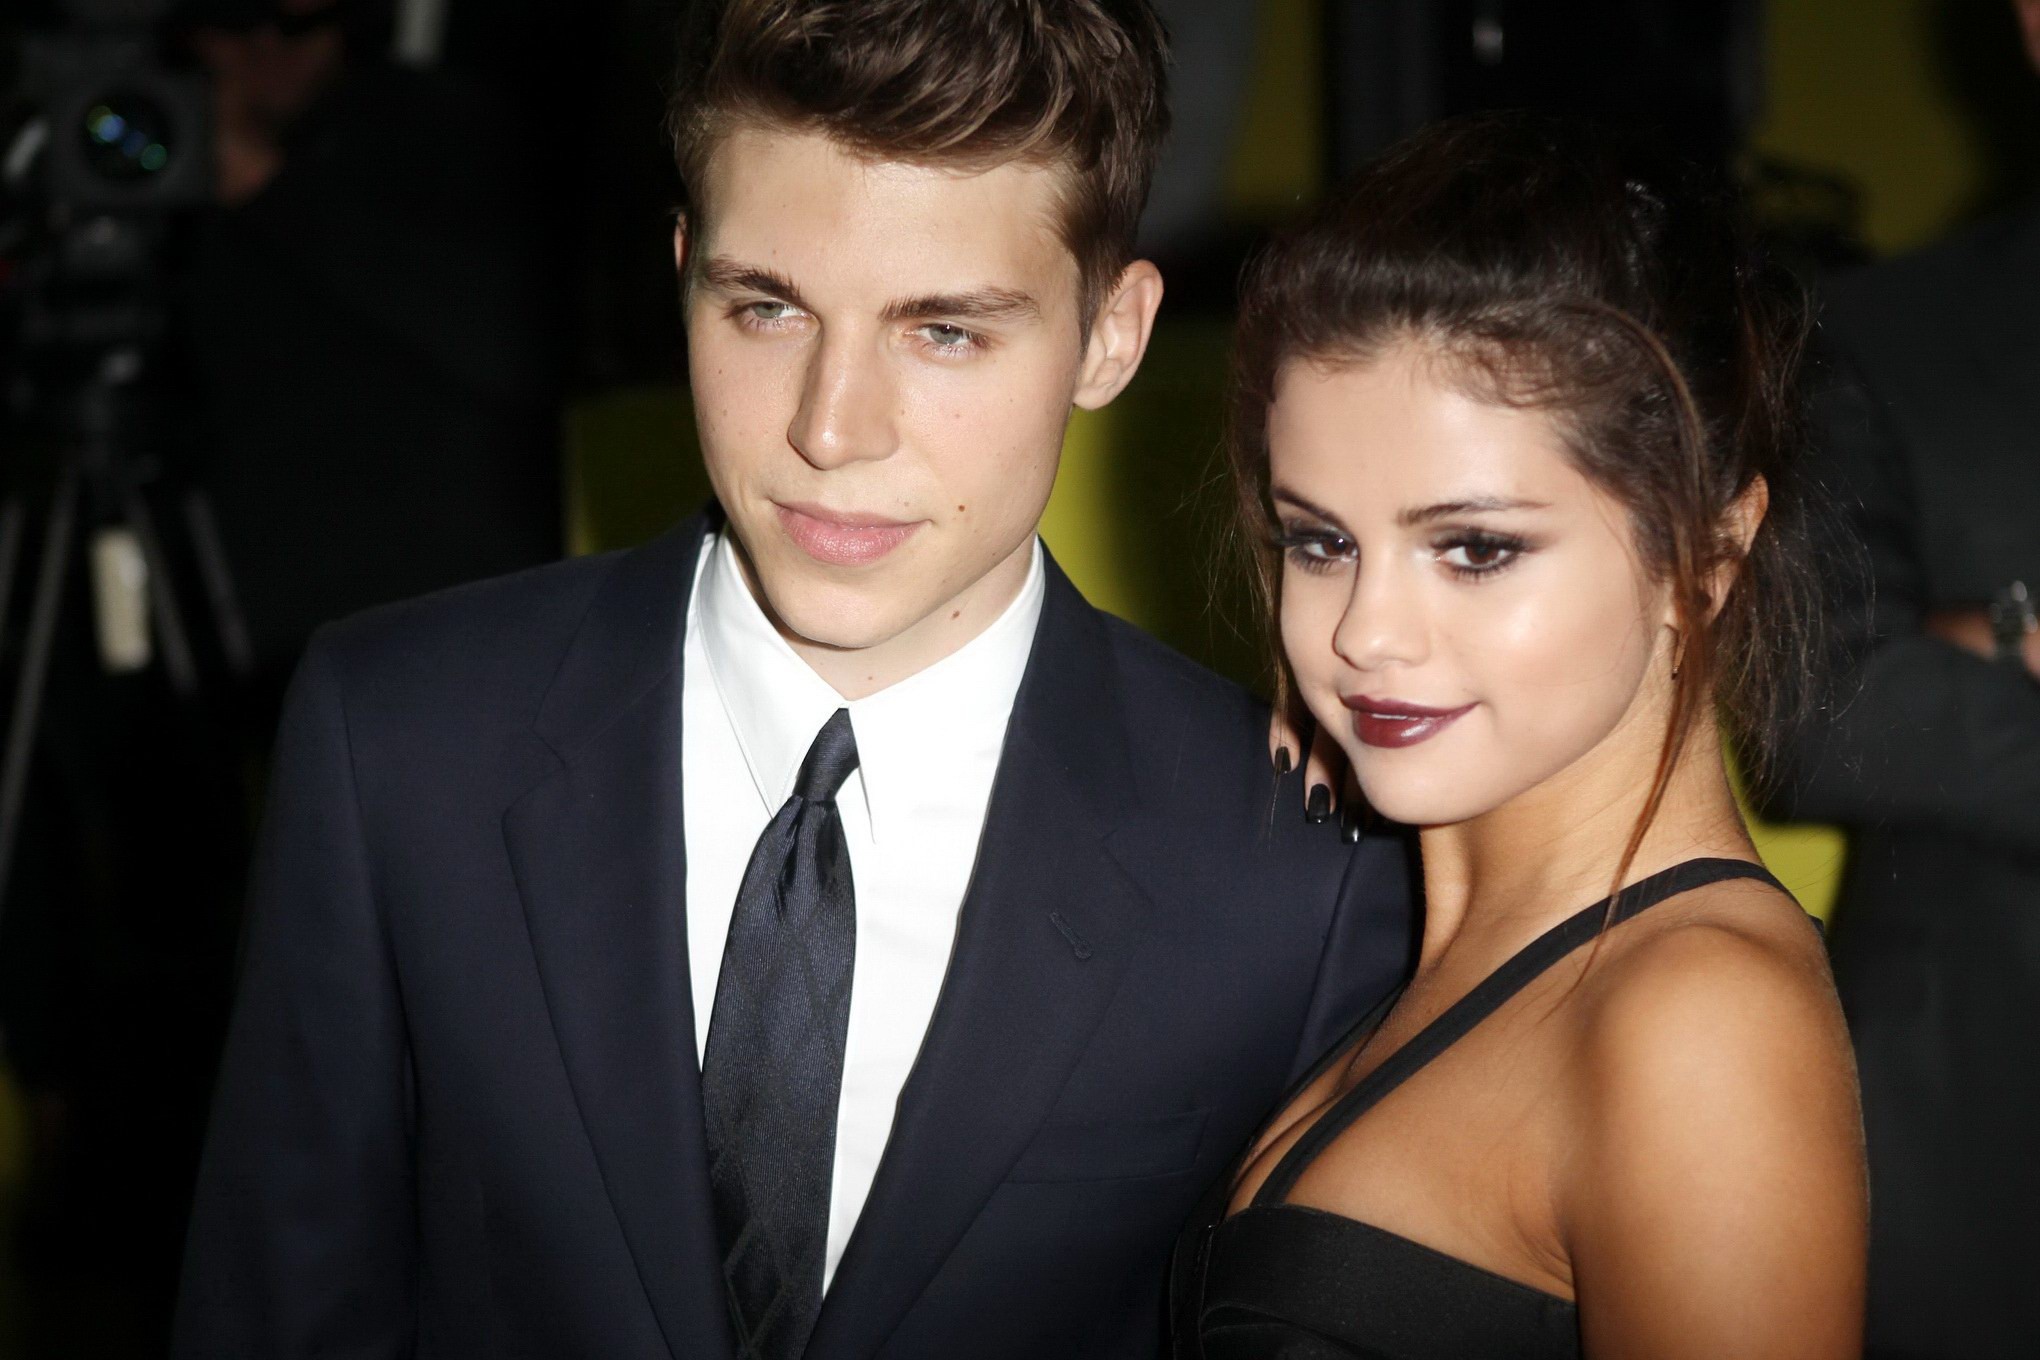 Selena Gomez cleavy wearing a sexy black dress at Versace fashion show in Milan #75214550